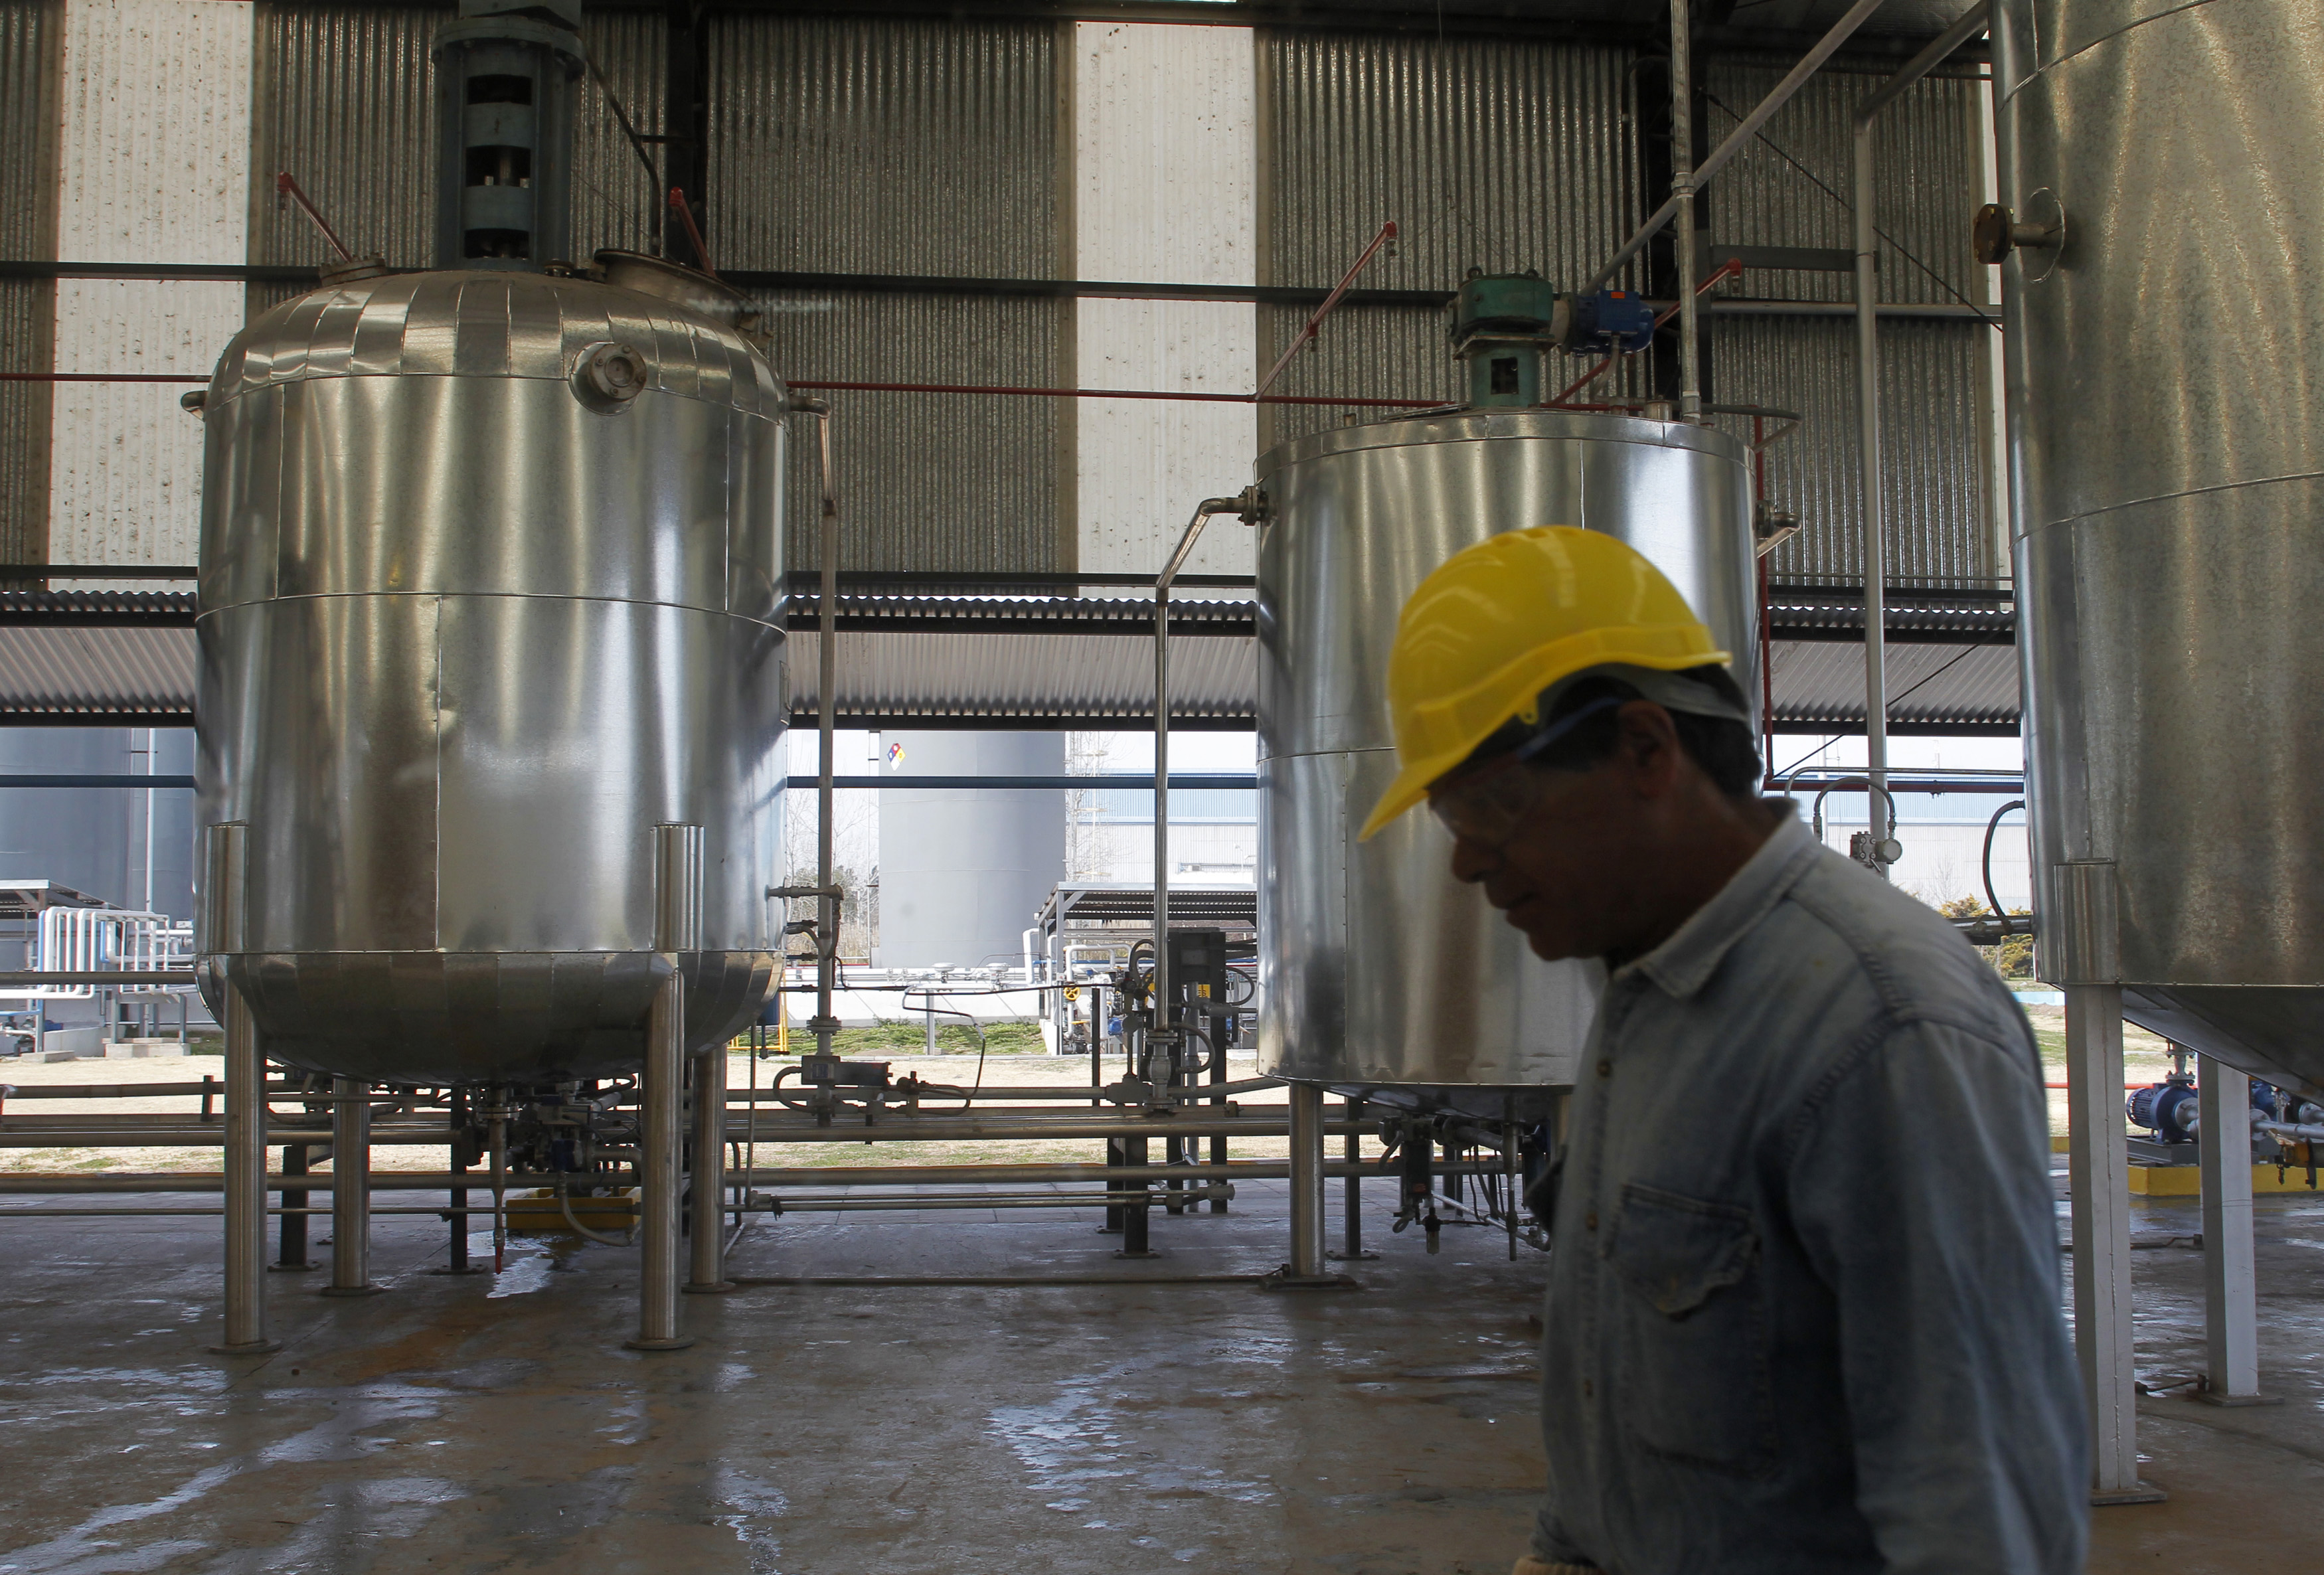 A technician walks by at the newly opened Oilfox S.A. Biofuel factory in San Nicolas